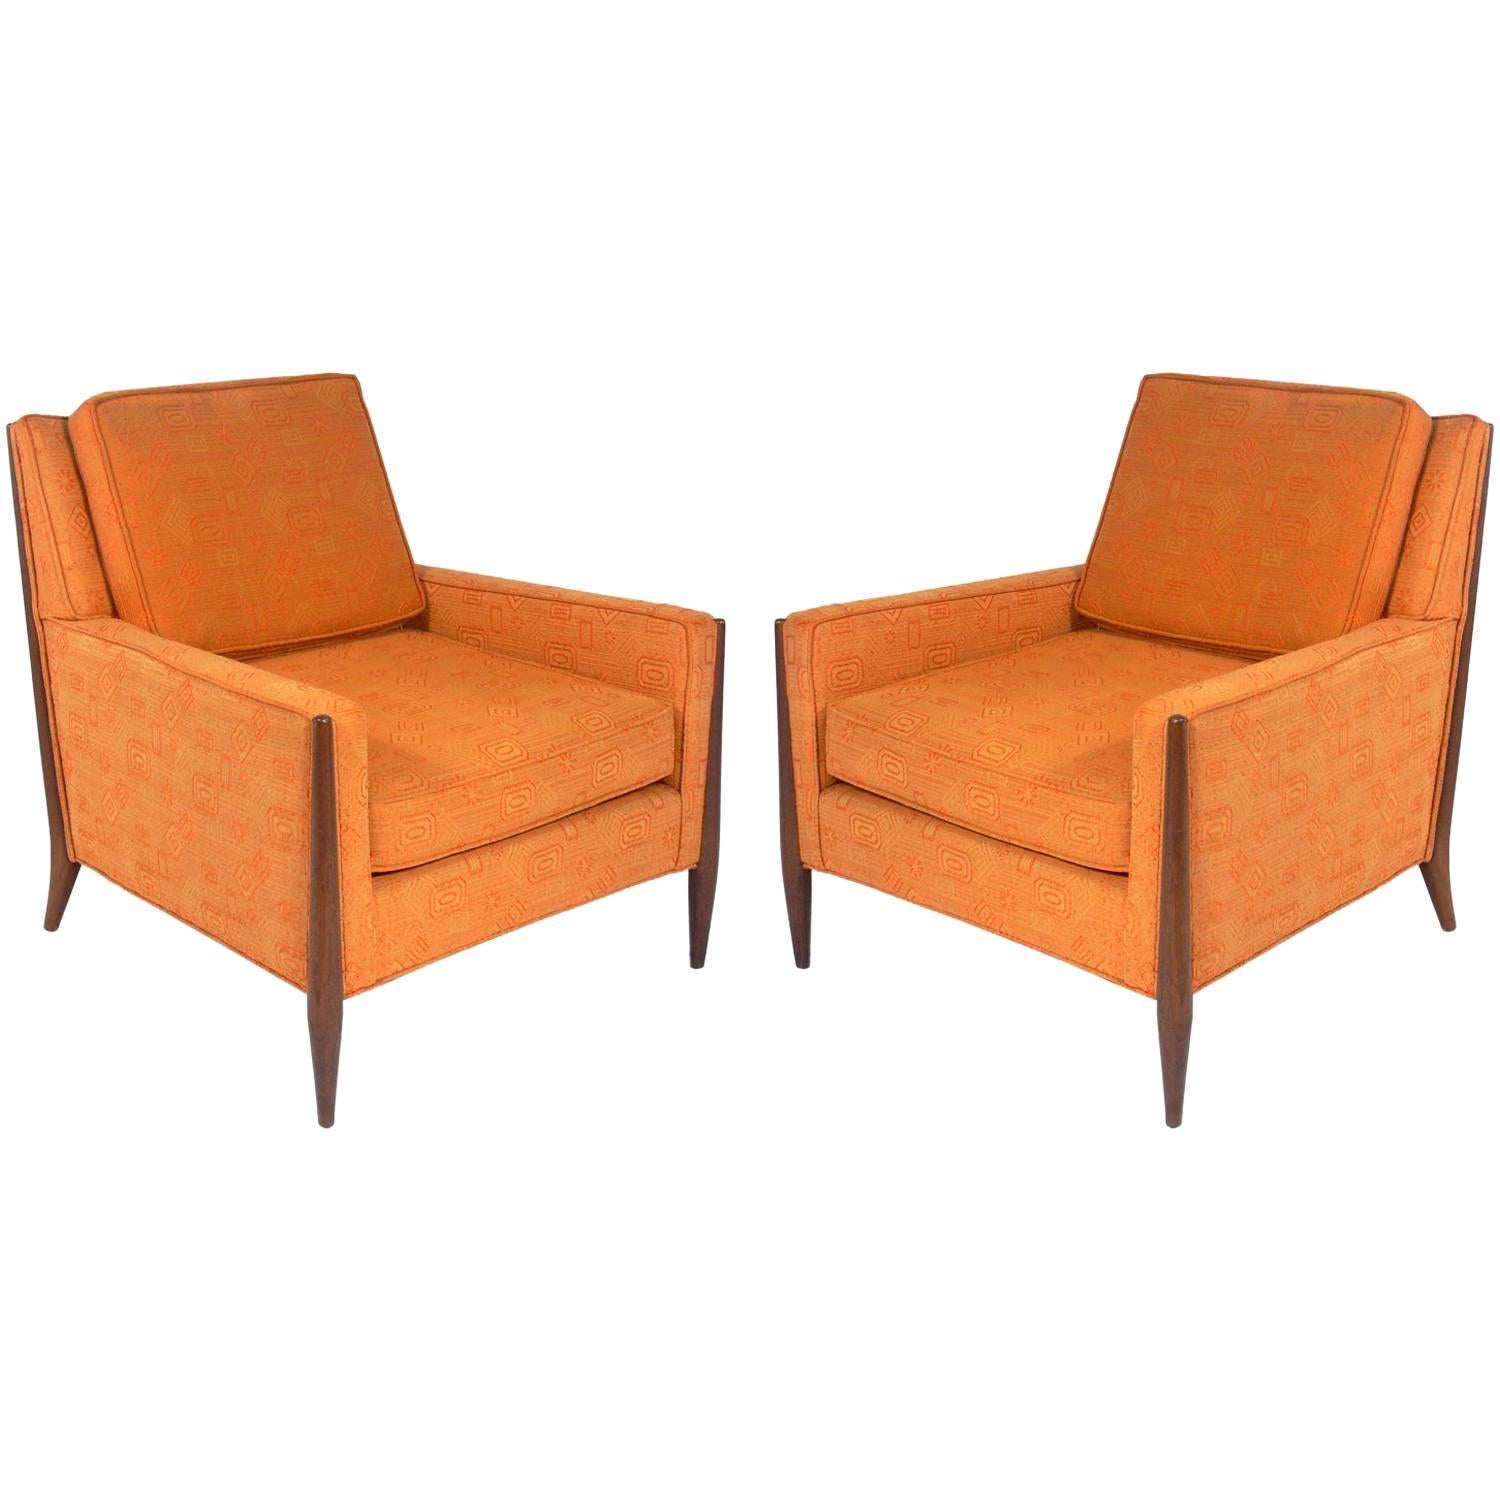 Pair of Clean Lined Midcentury Lounge Chairs